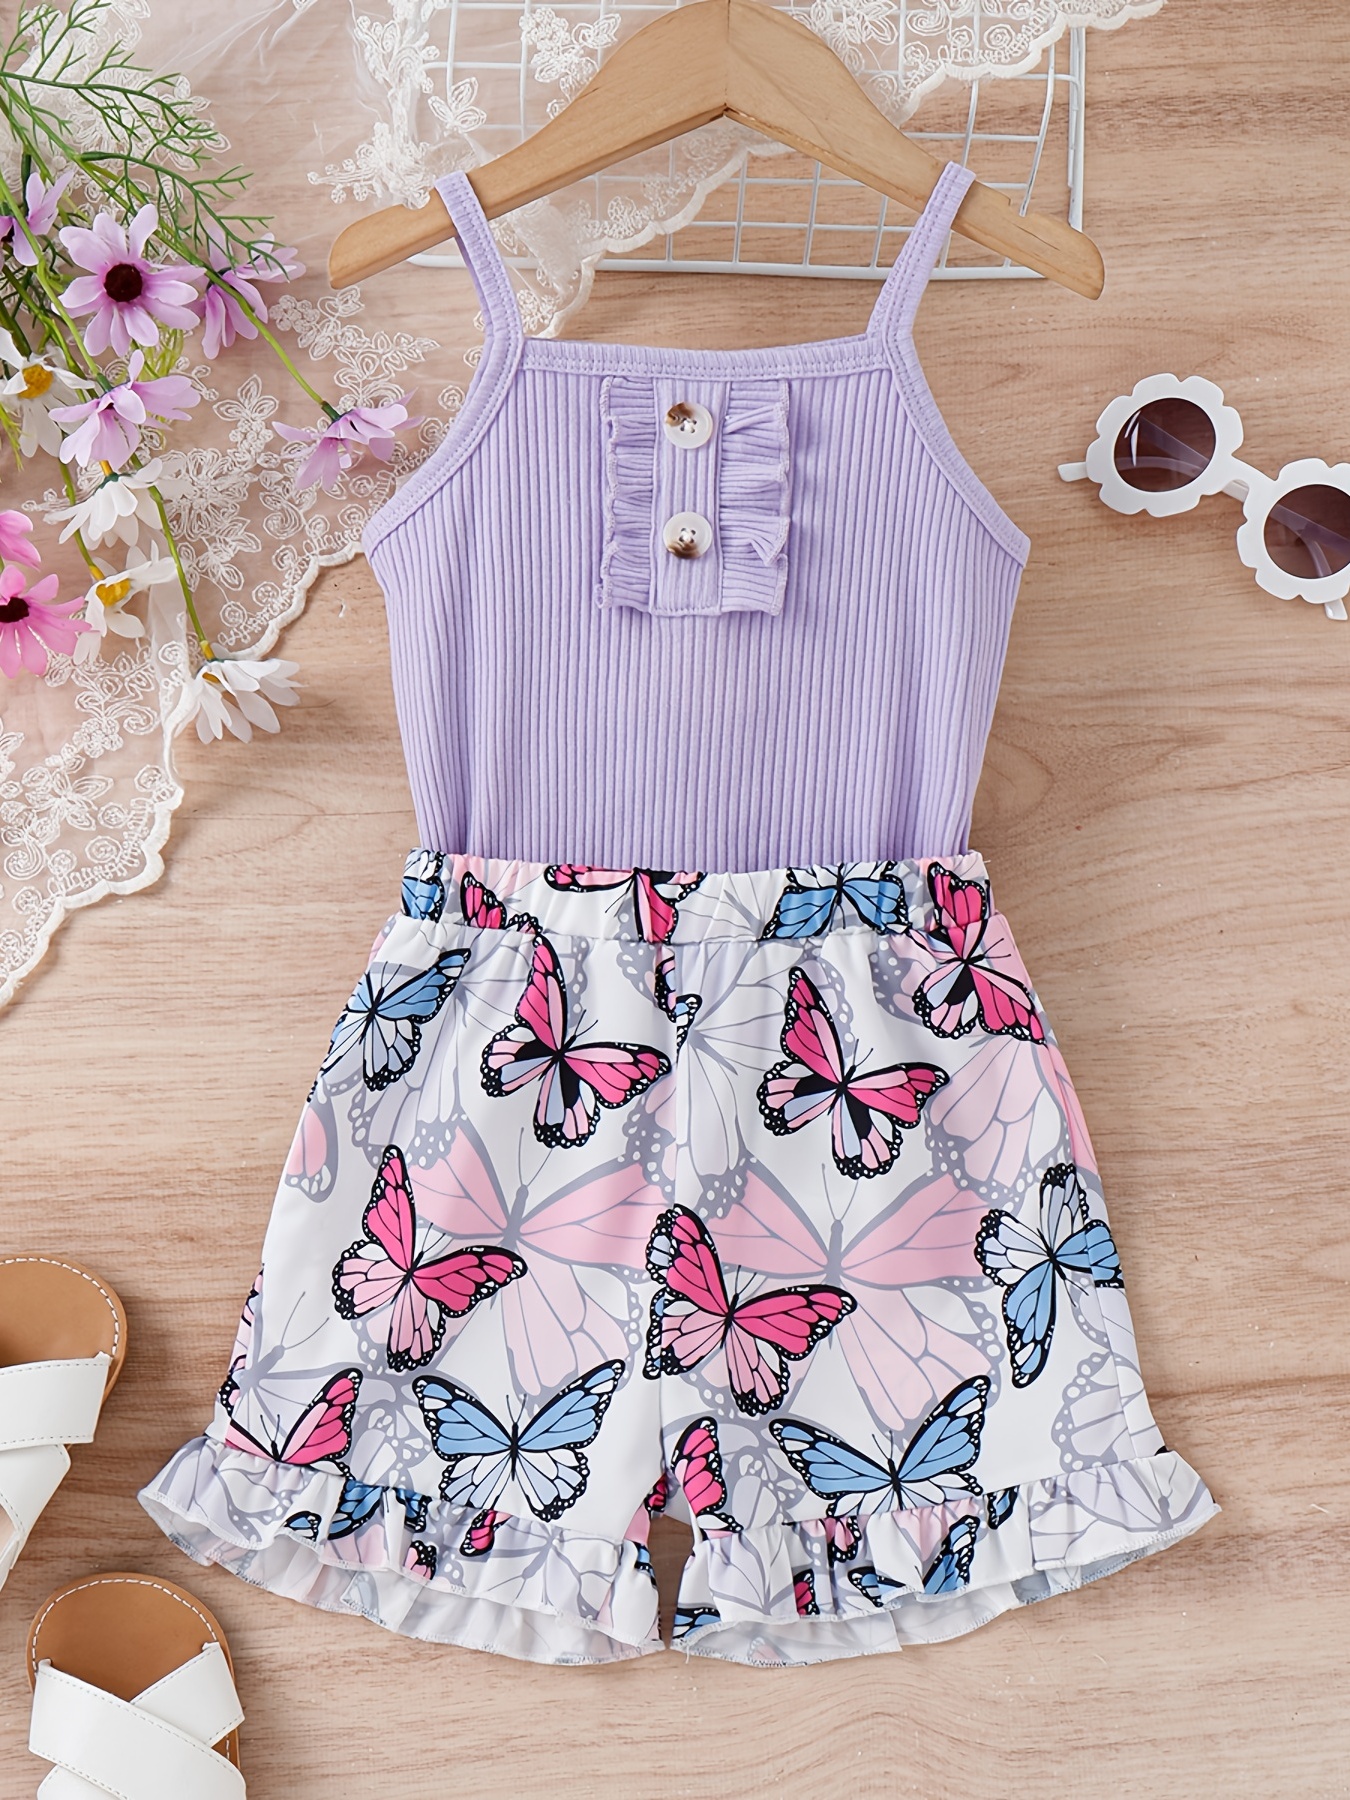 2pcs Toddler Girl Butterfly Print Camisole and Elasticized Shorts Set